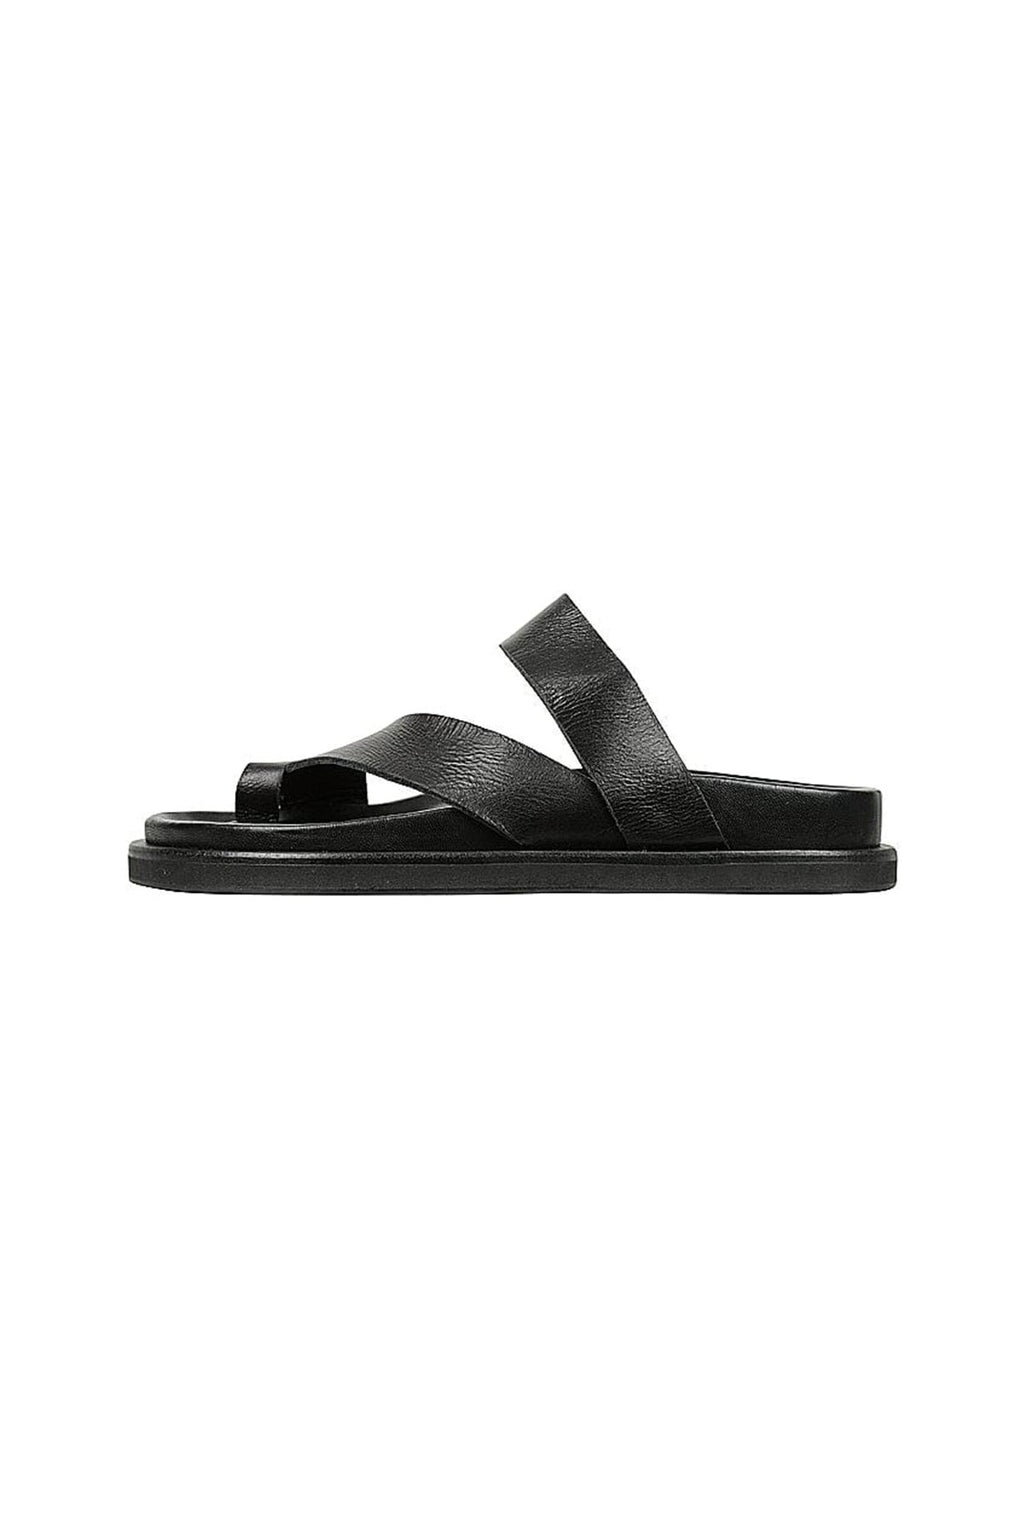 The Bali Tailor - The Camille Slide - Black